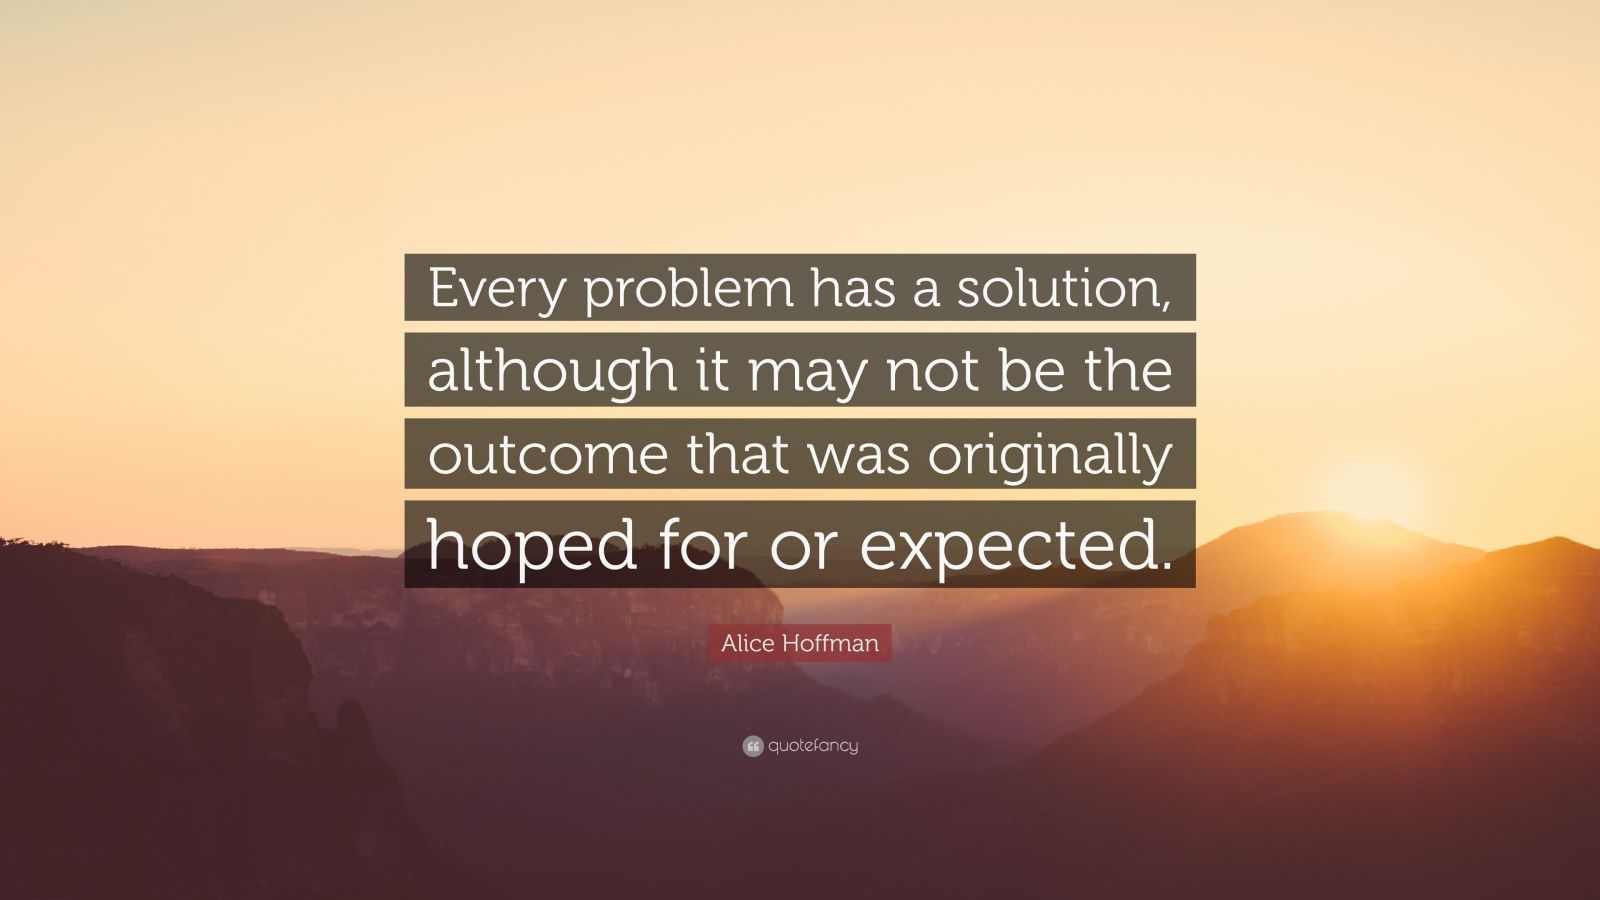 Alice Hoffman Quote: “Every problem has a solution, although it may not